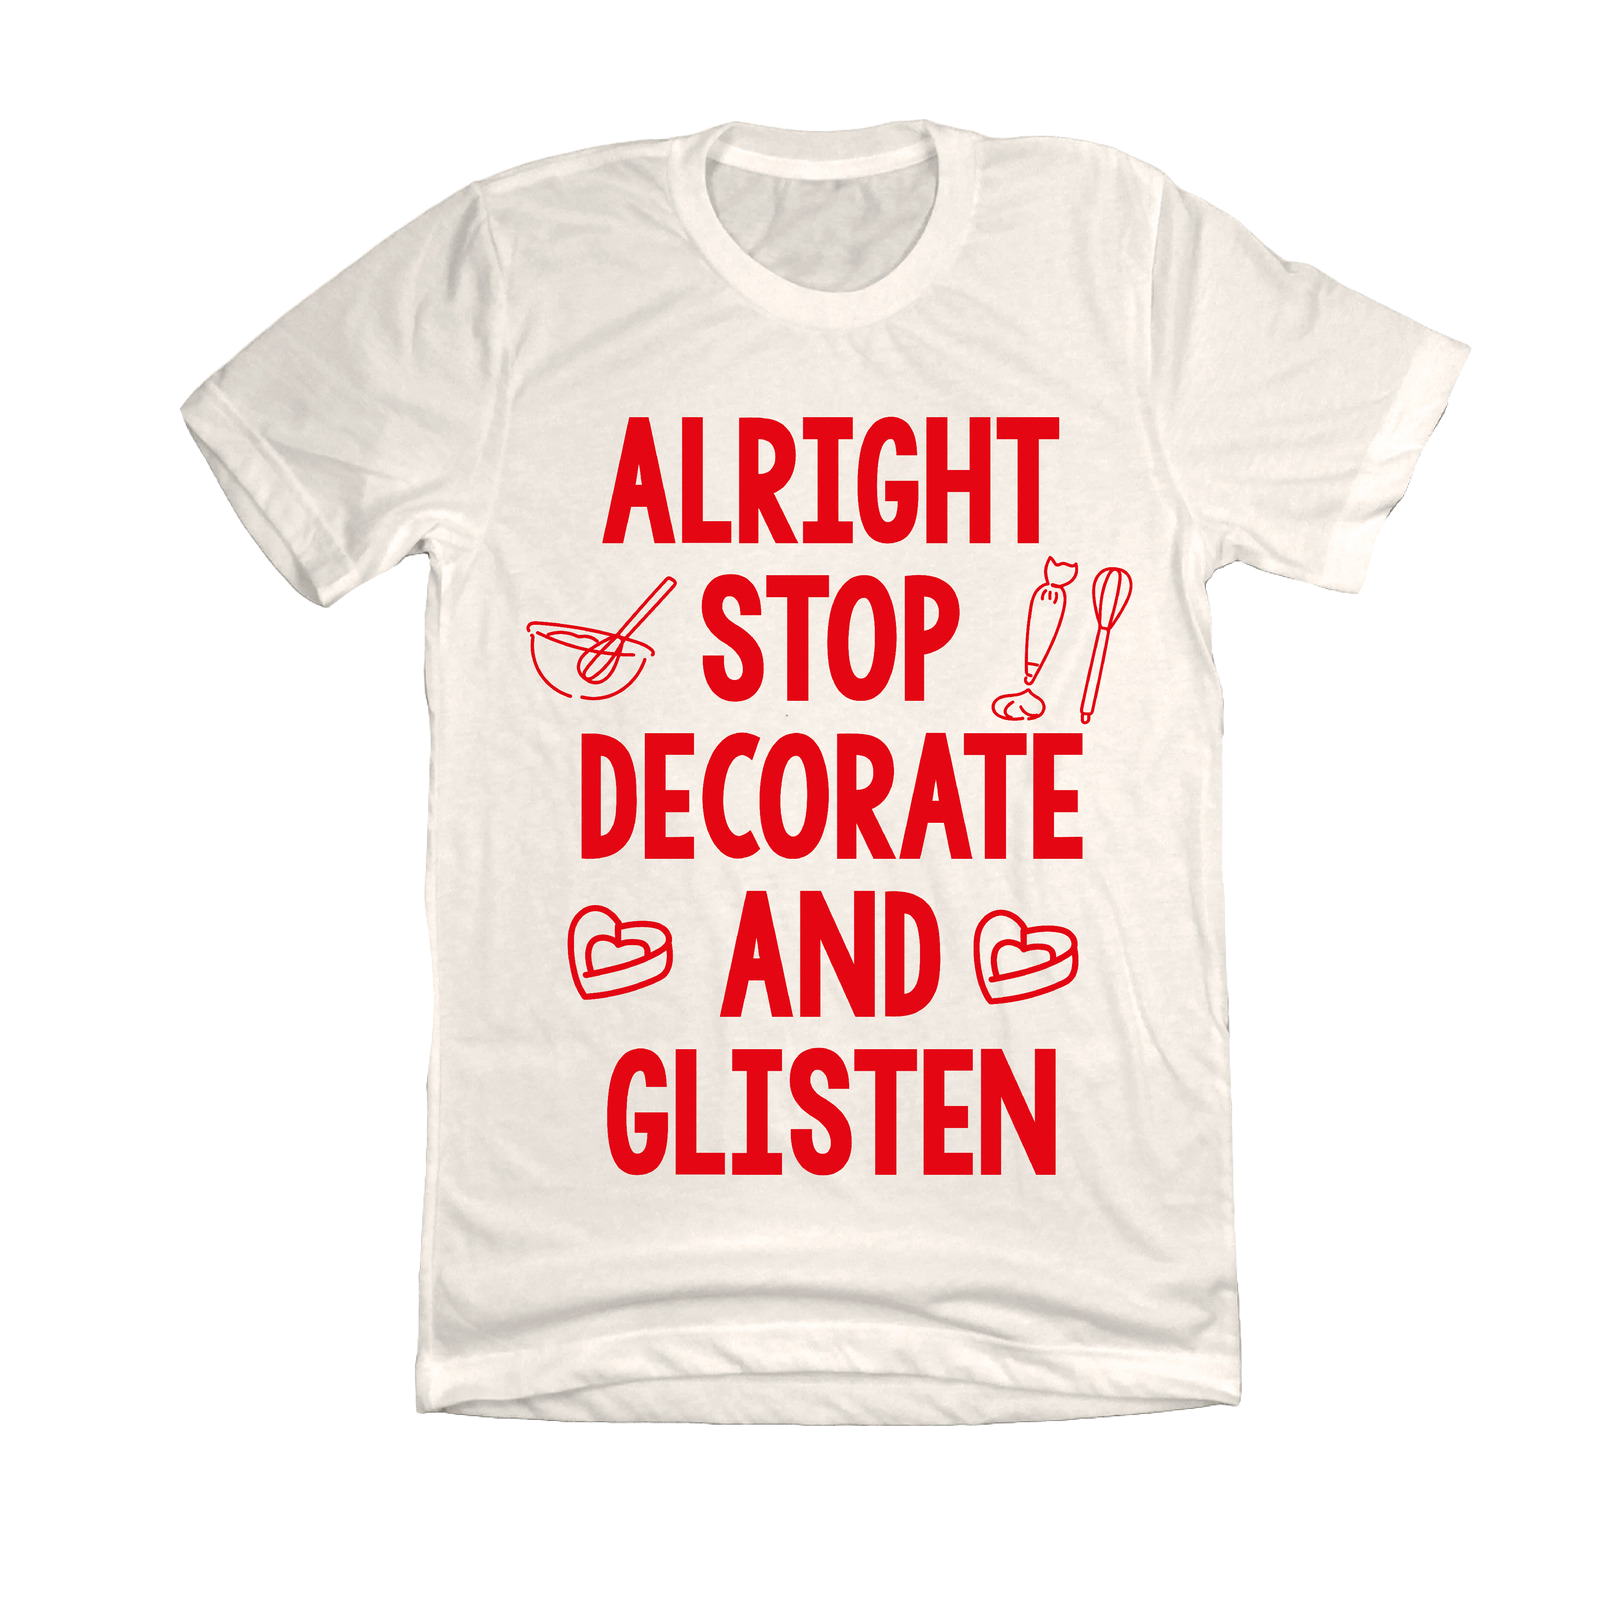 Alright Stop- Decorate and Glisten white T-shirt Dressing festive